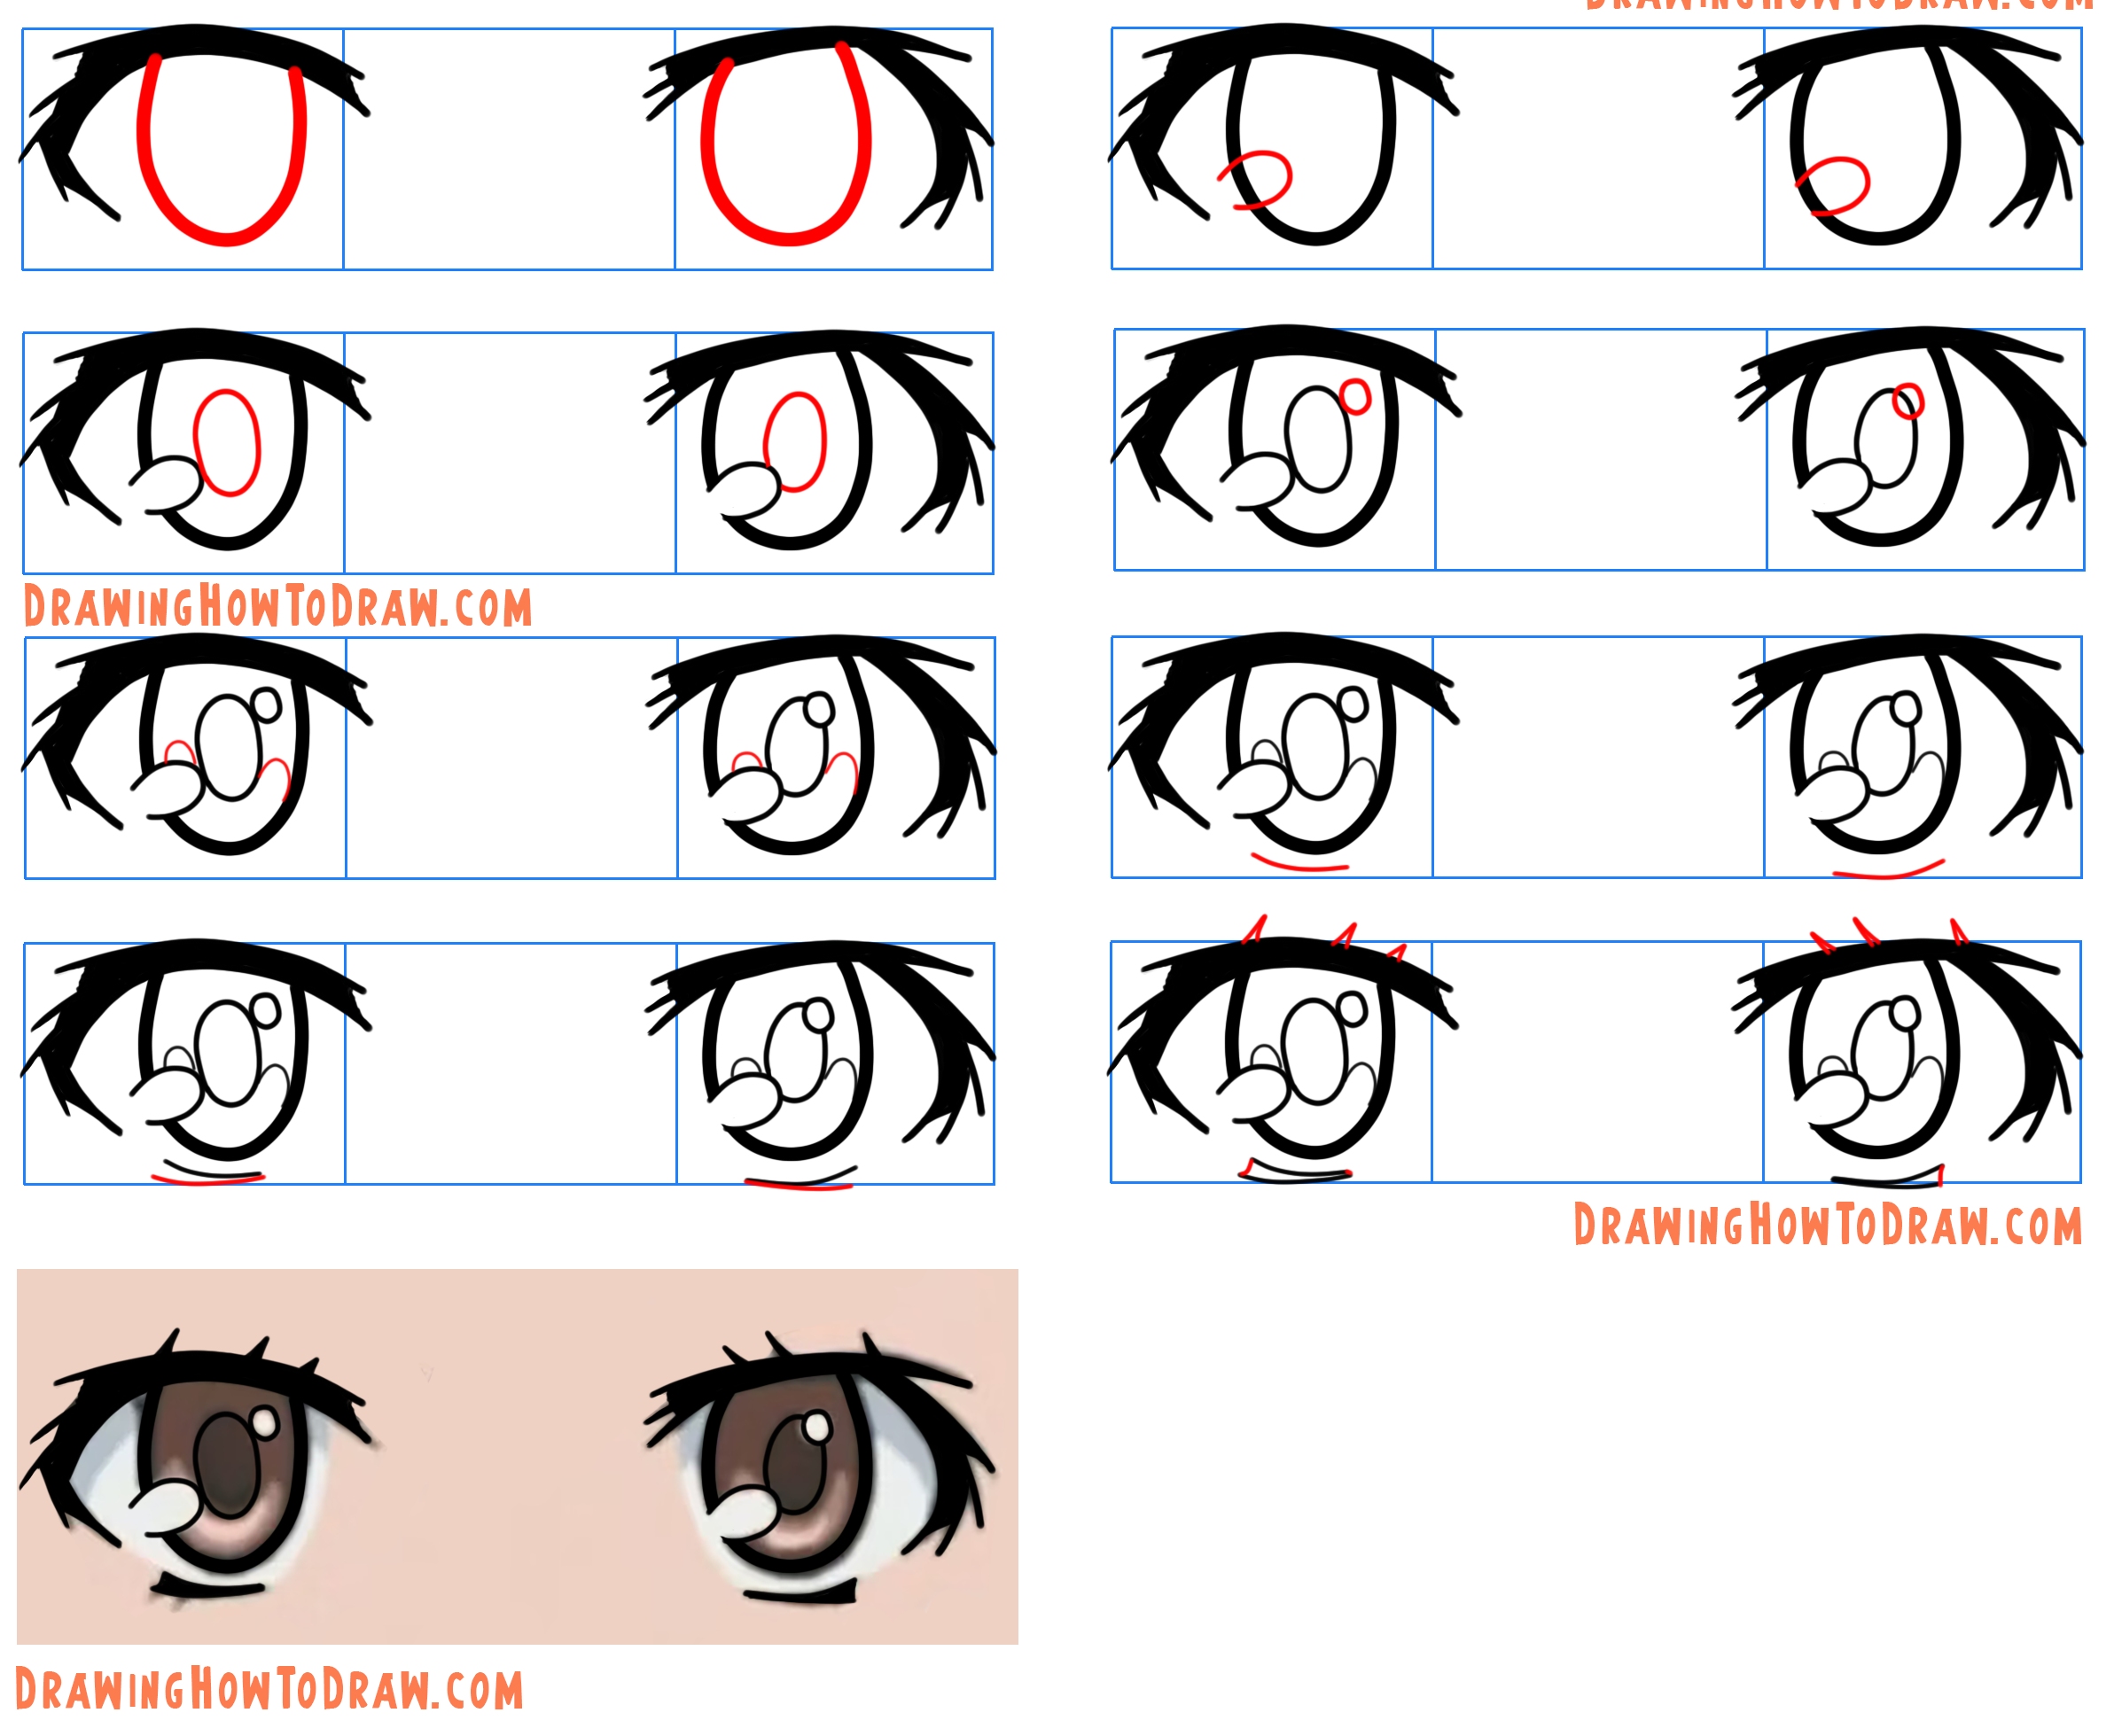 How to Draw Manga Eyes! Step by Step, Slow Tutorial for Beginners